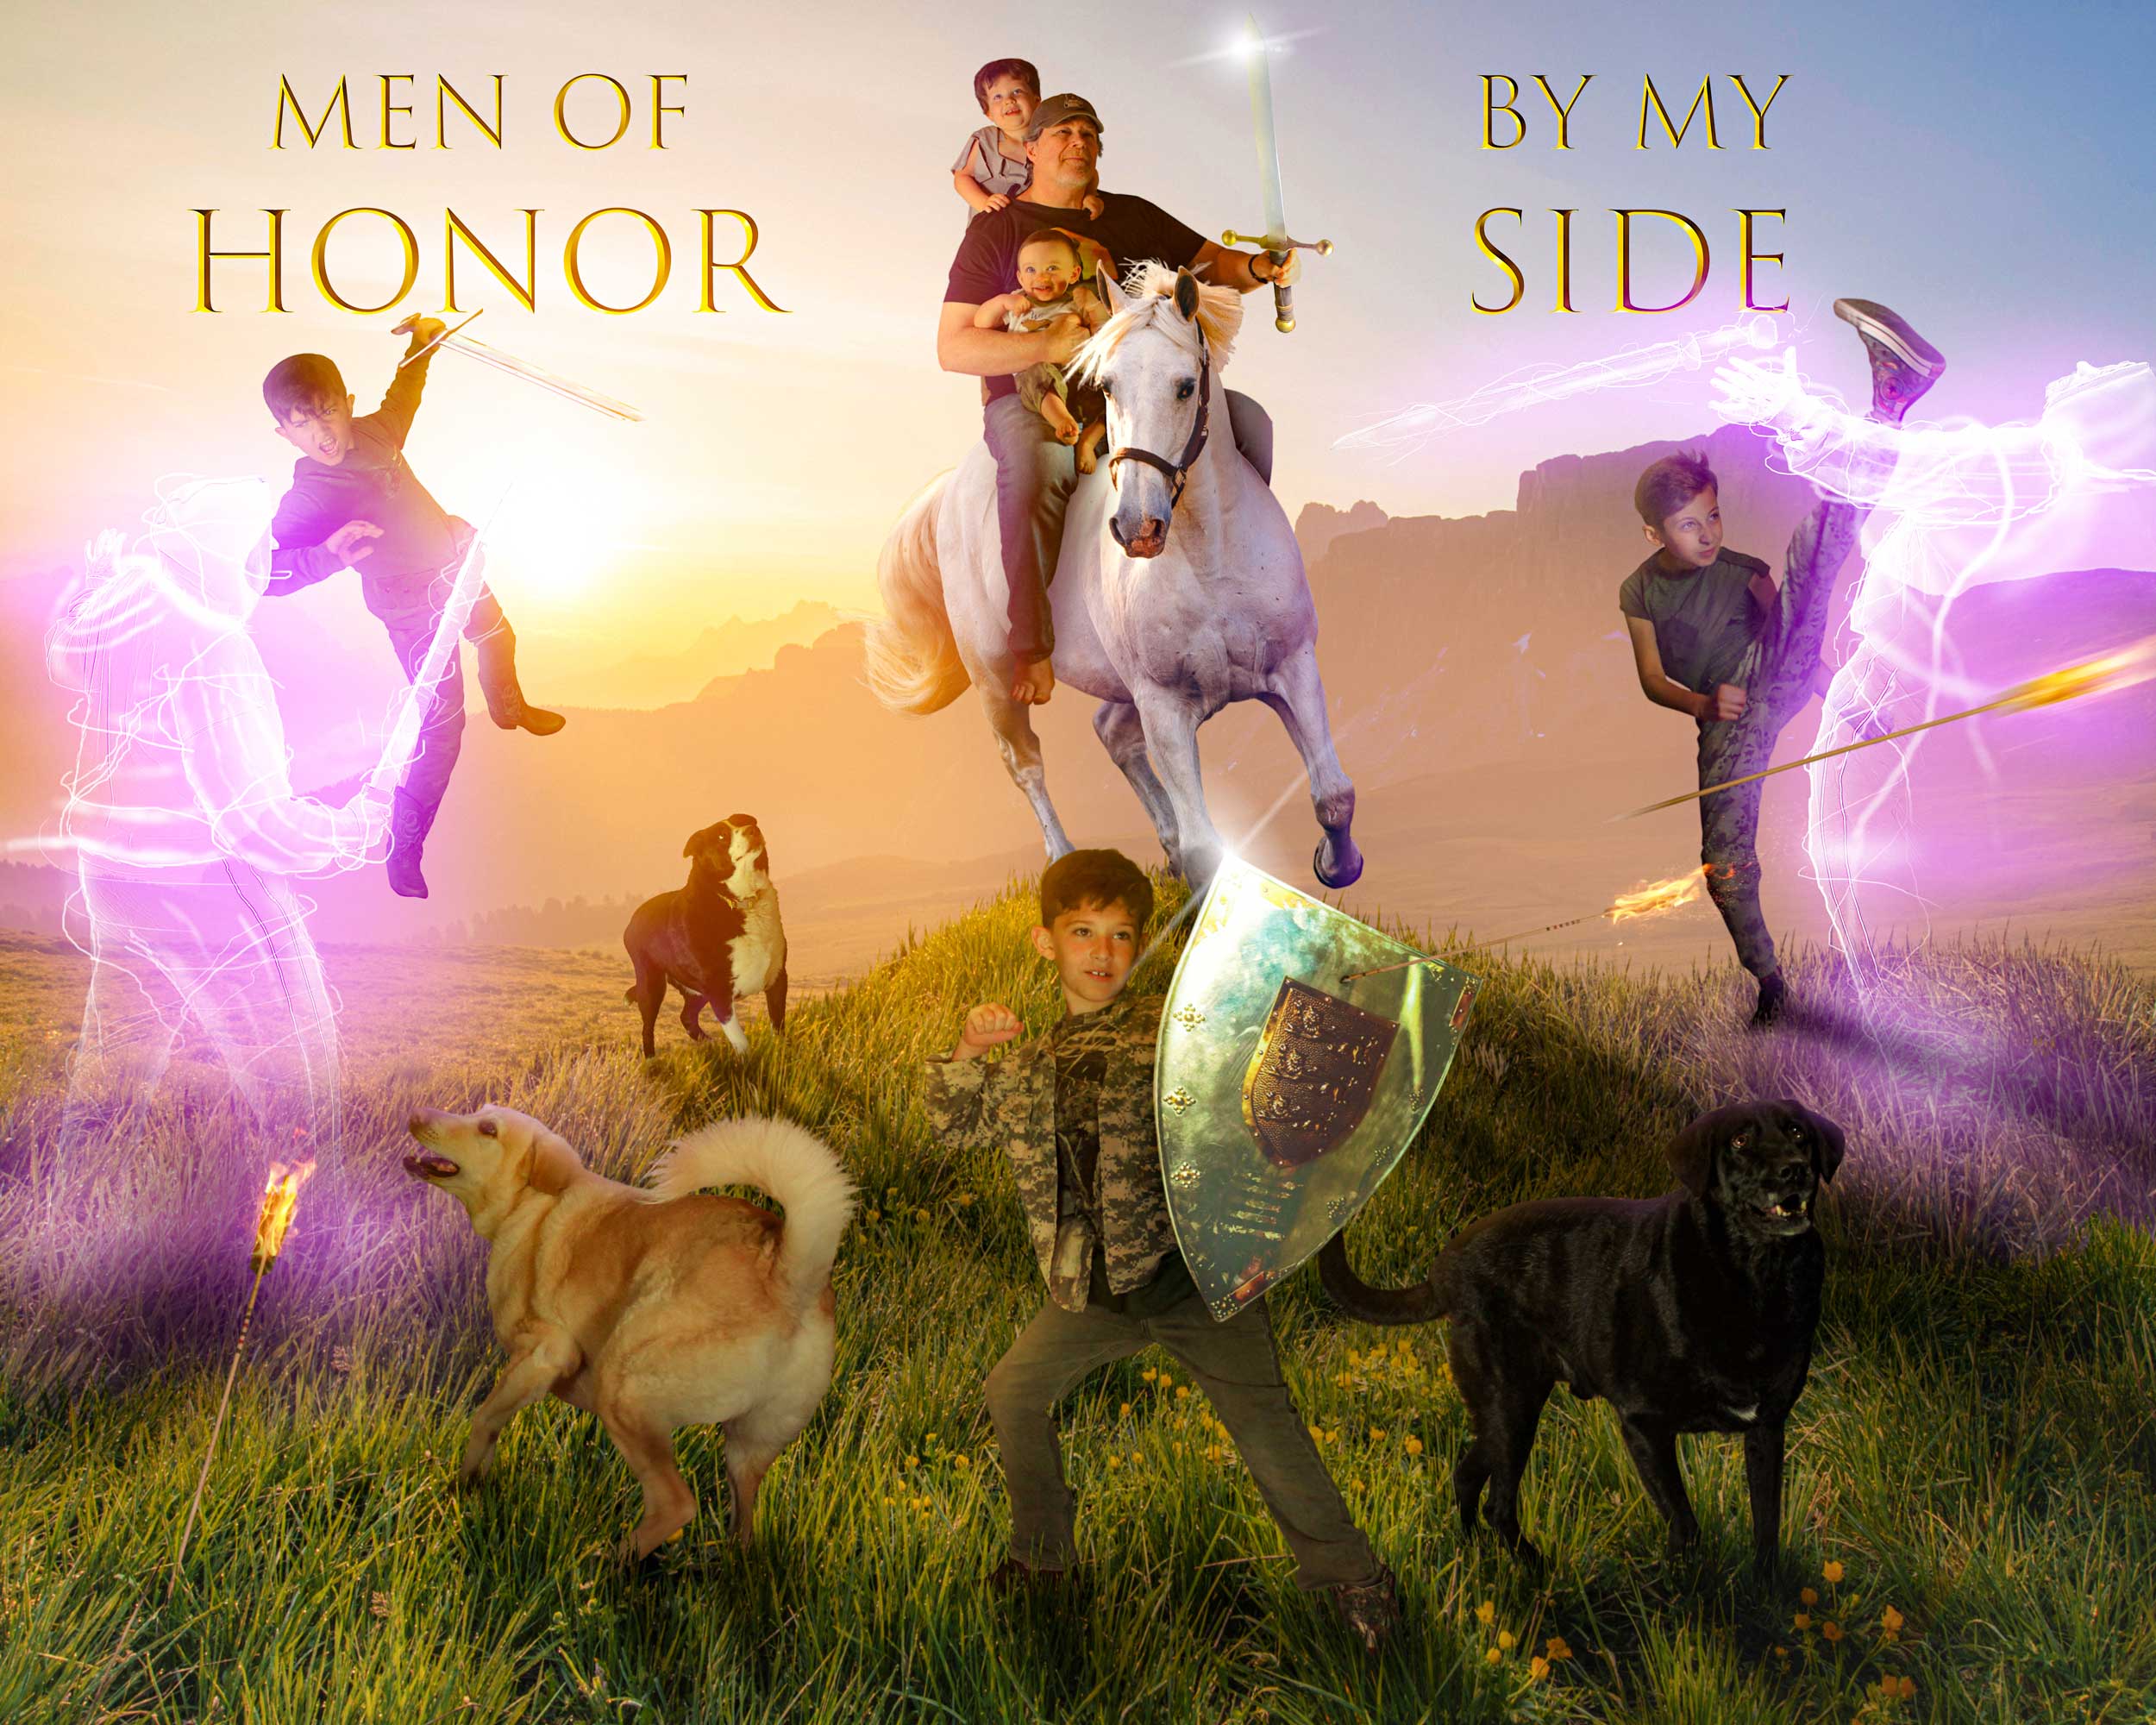 A man, his 5 young grandchildren, and 3 valiant dogs conquer a field of battle together.